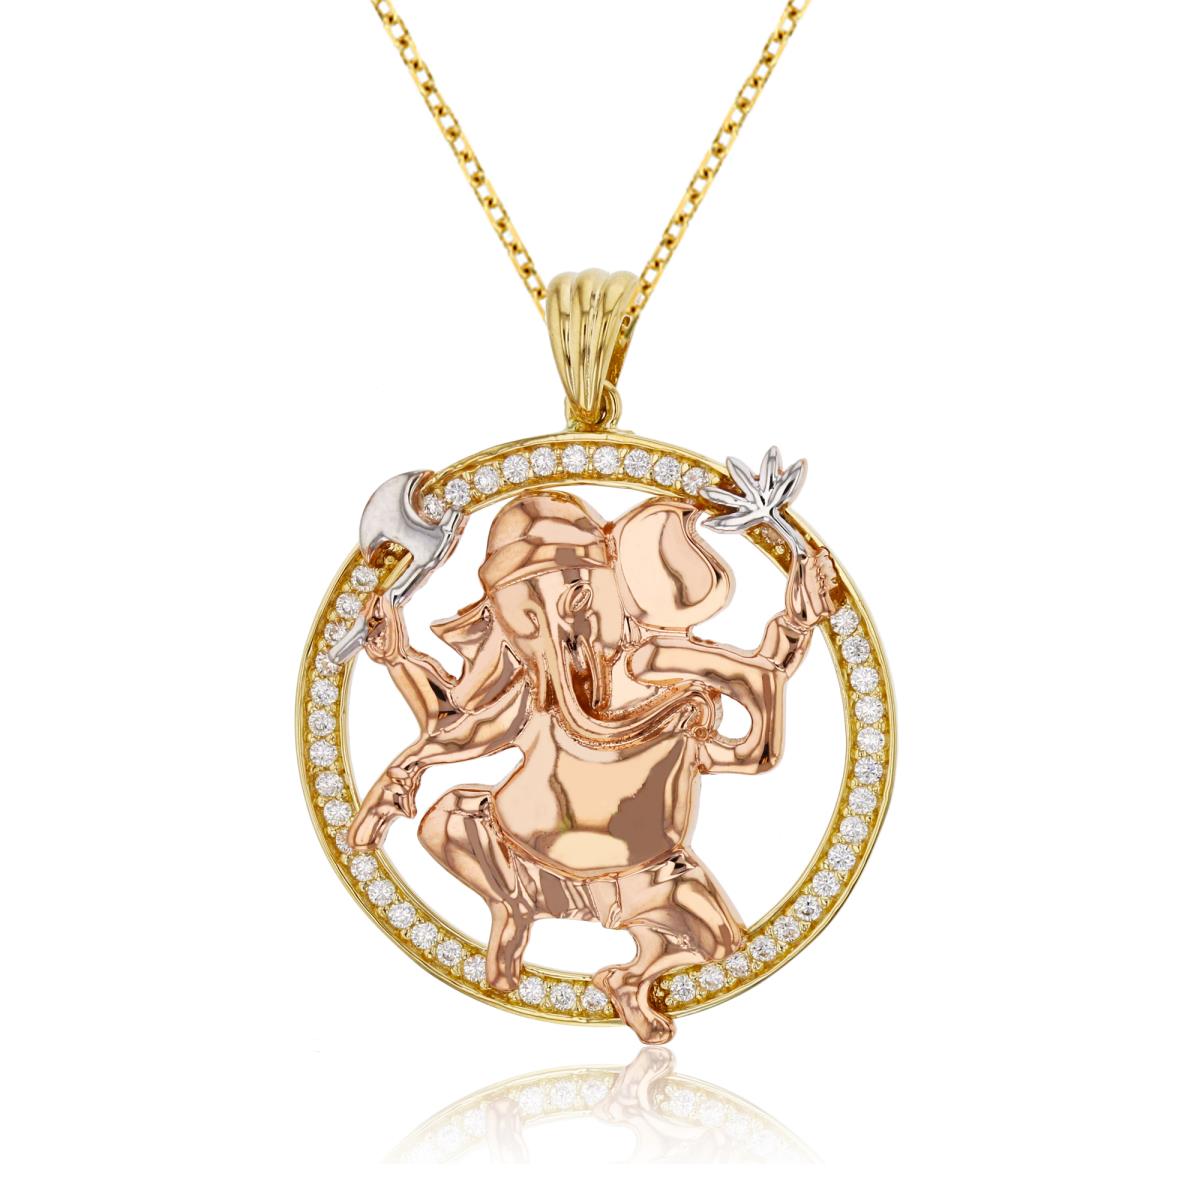 14K Gold Tricolor 34x29mm Indian Ganesha 20" Cable Chain Necklace